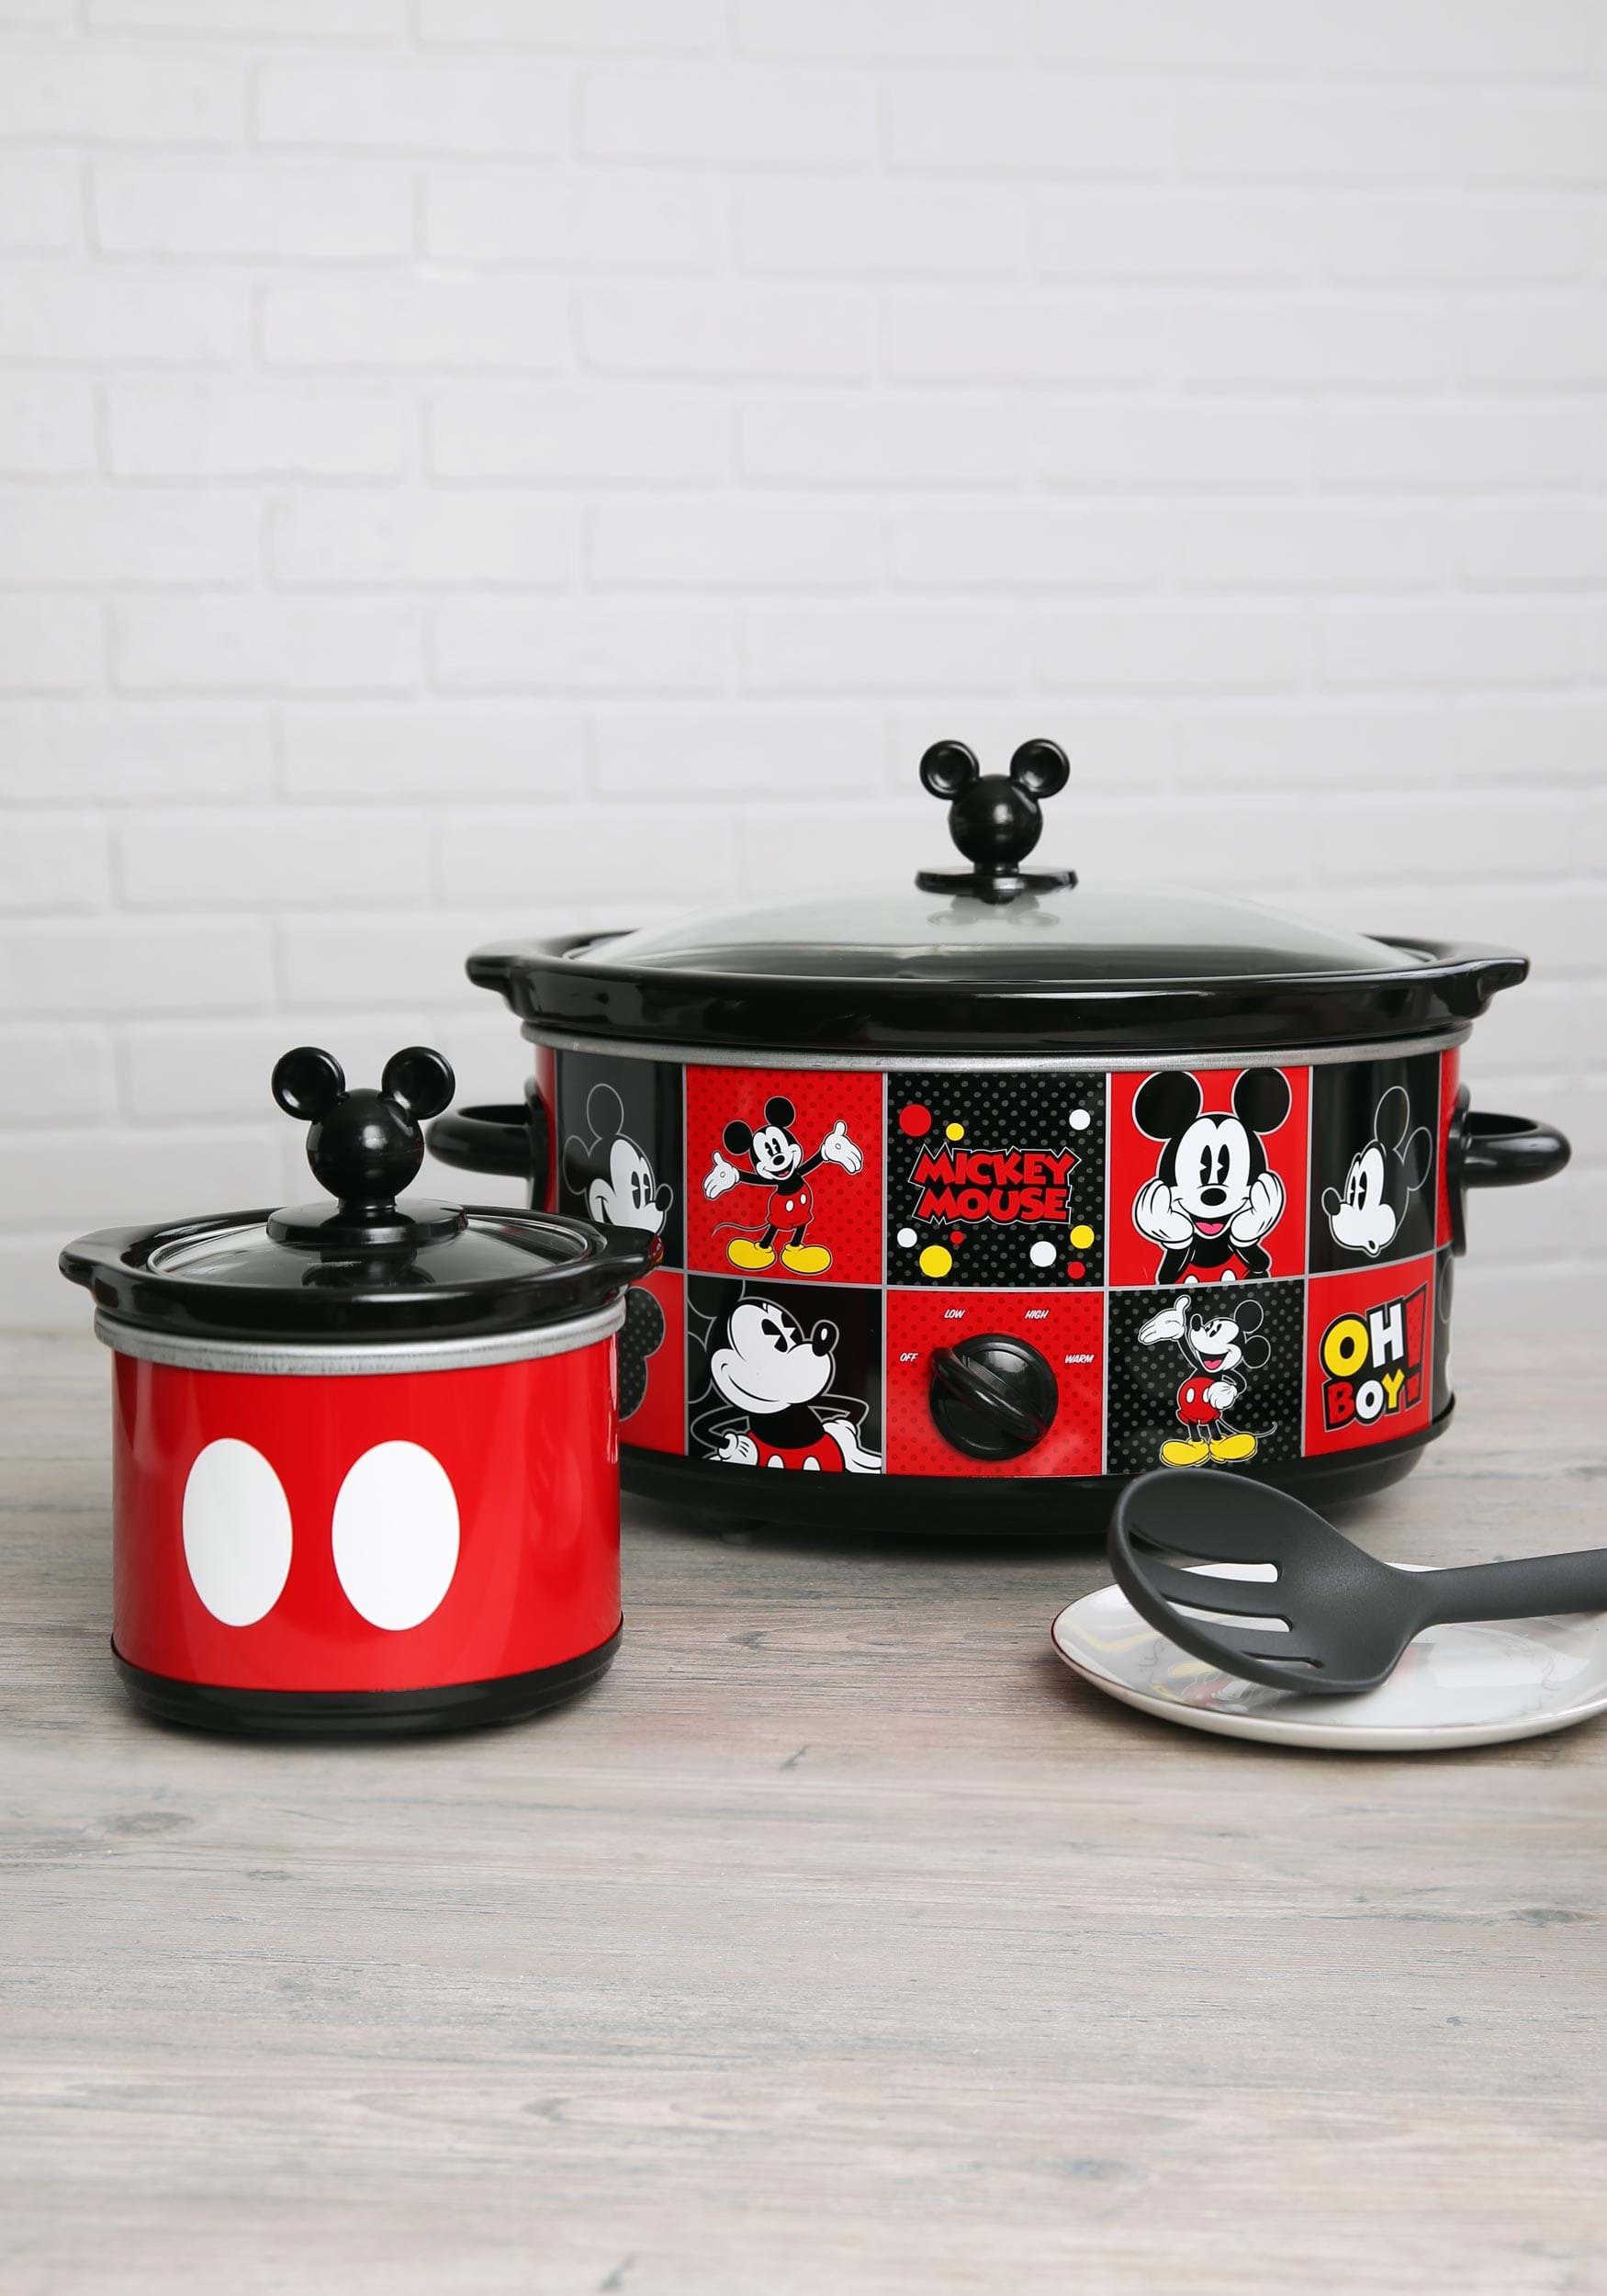 Disney Mickey Mouse 5 QT Slow Cooker w/ Dipper